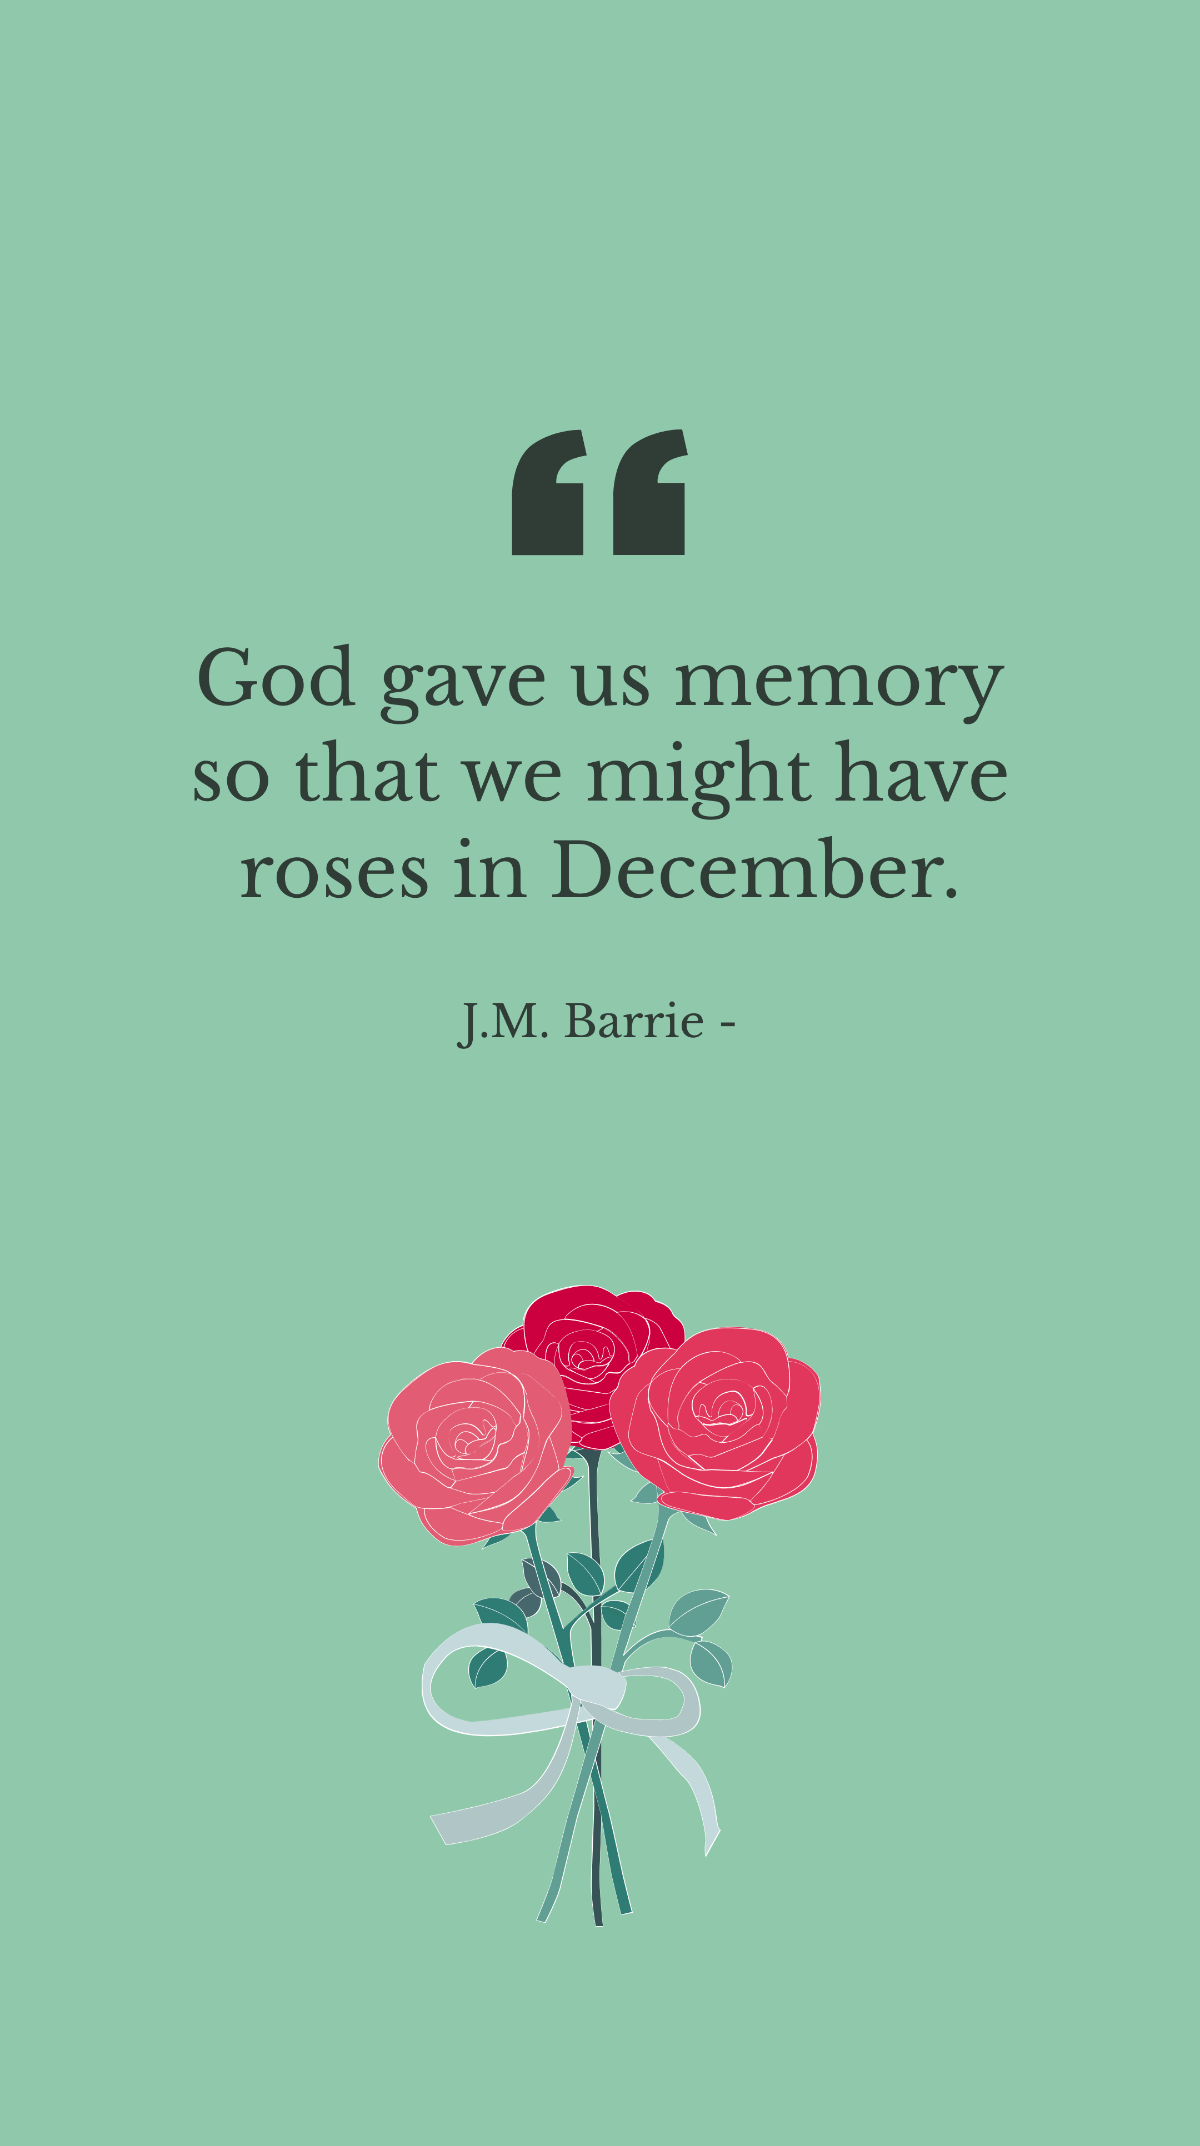 Free J.M. Barrie - God gave us memory so that we might have roses in December. Template